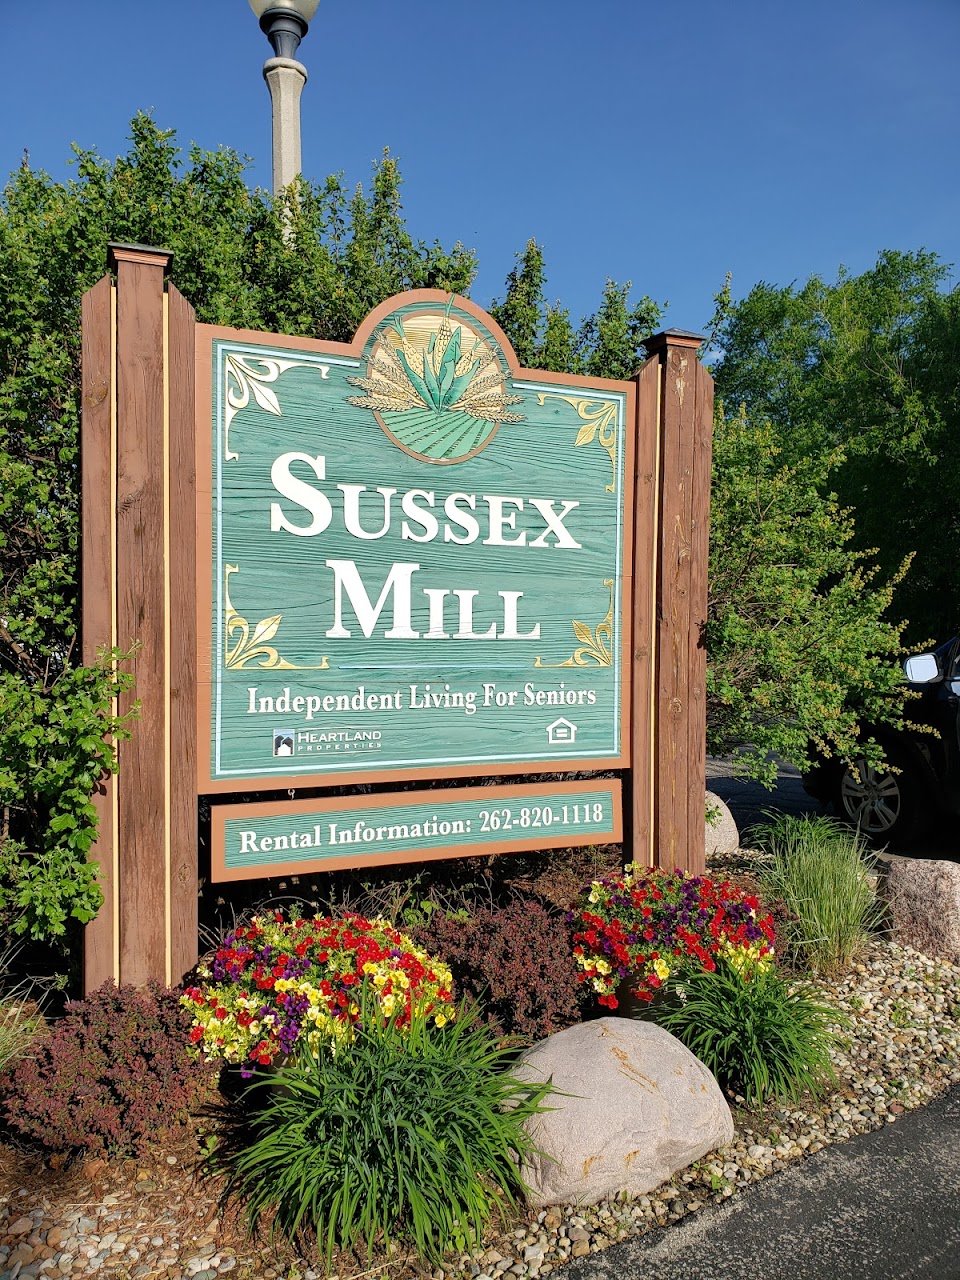 Photo of SUSSEX MILL. Affordable housing located at W240N6345 MAPLE AVE SUSSEX, WI 53089